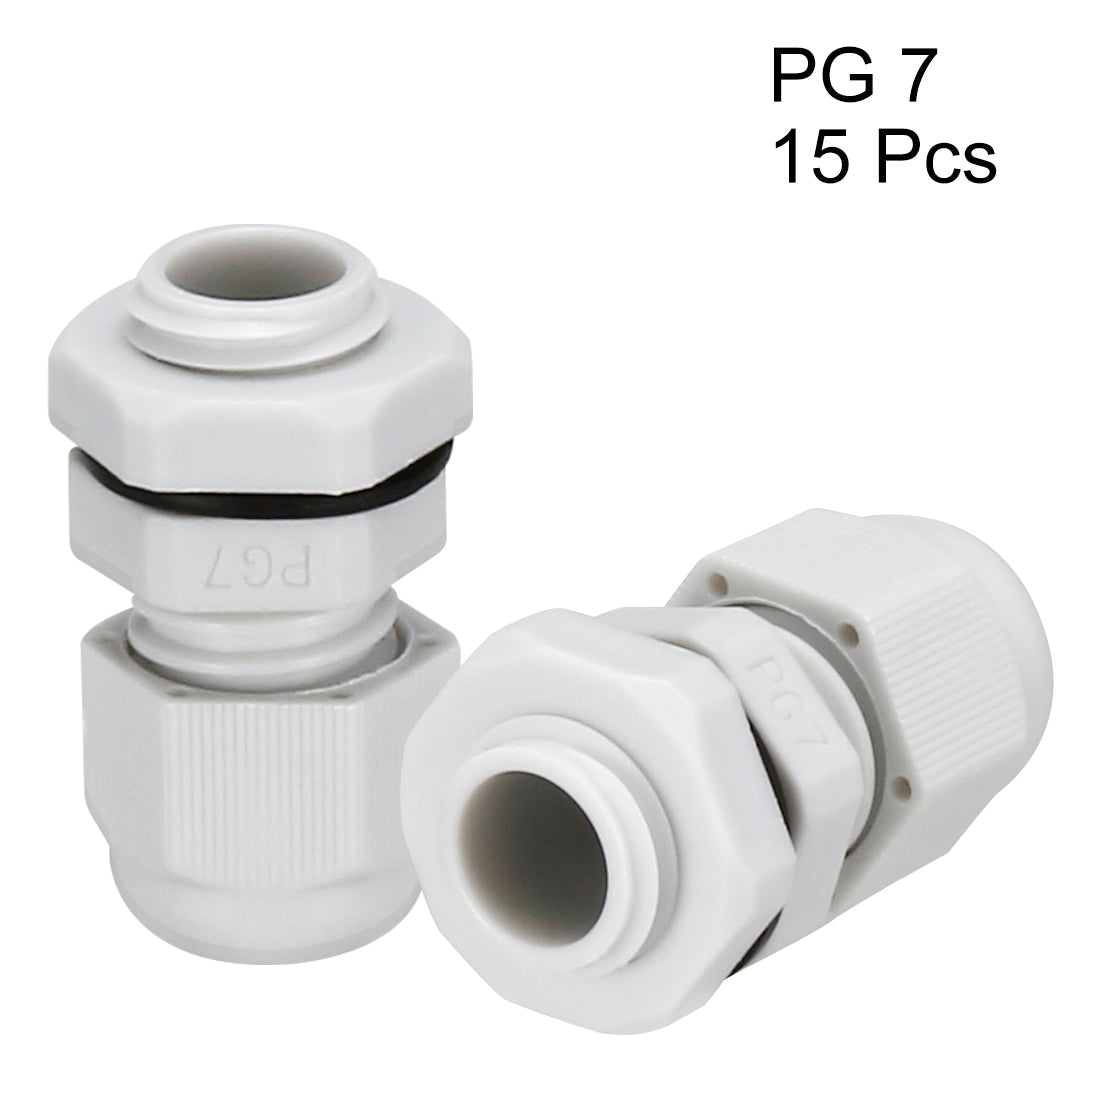 uxcell Uxcell PG7 Cable Gland Waterproof Plastic Joint Adjustable Locknut White for 3mm-6.5mm Dia Cable Wire 15 Pcs